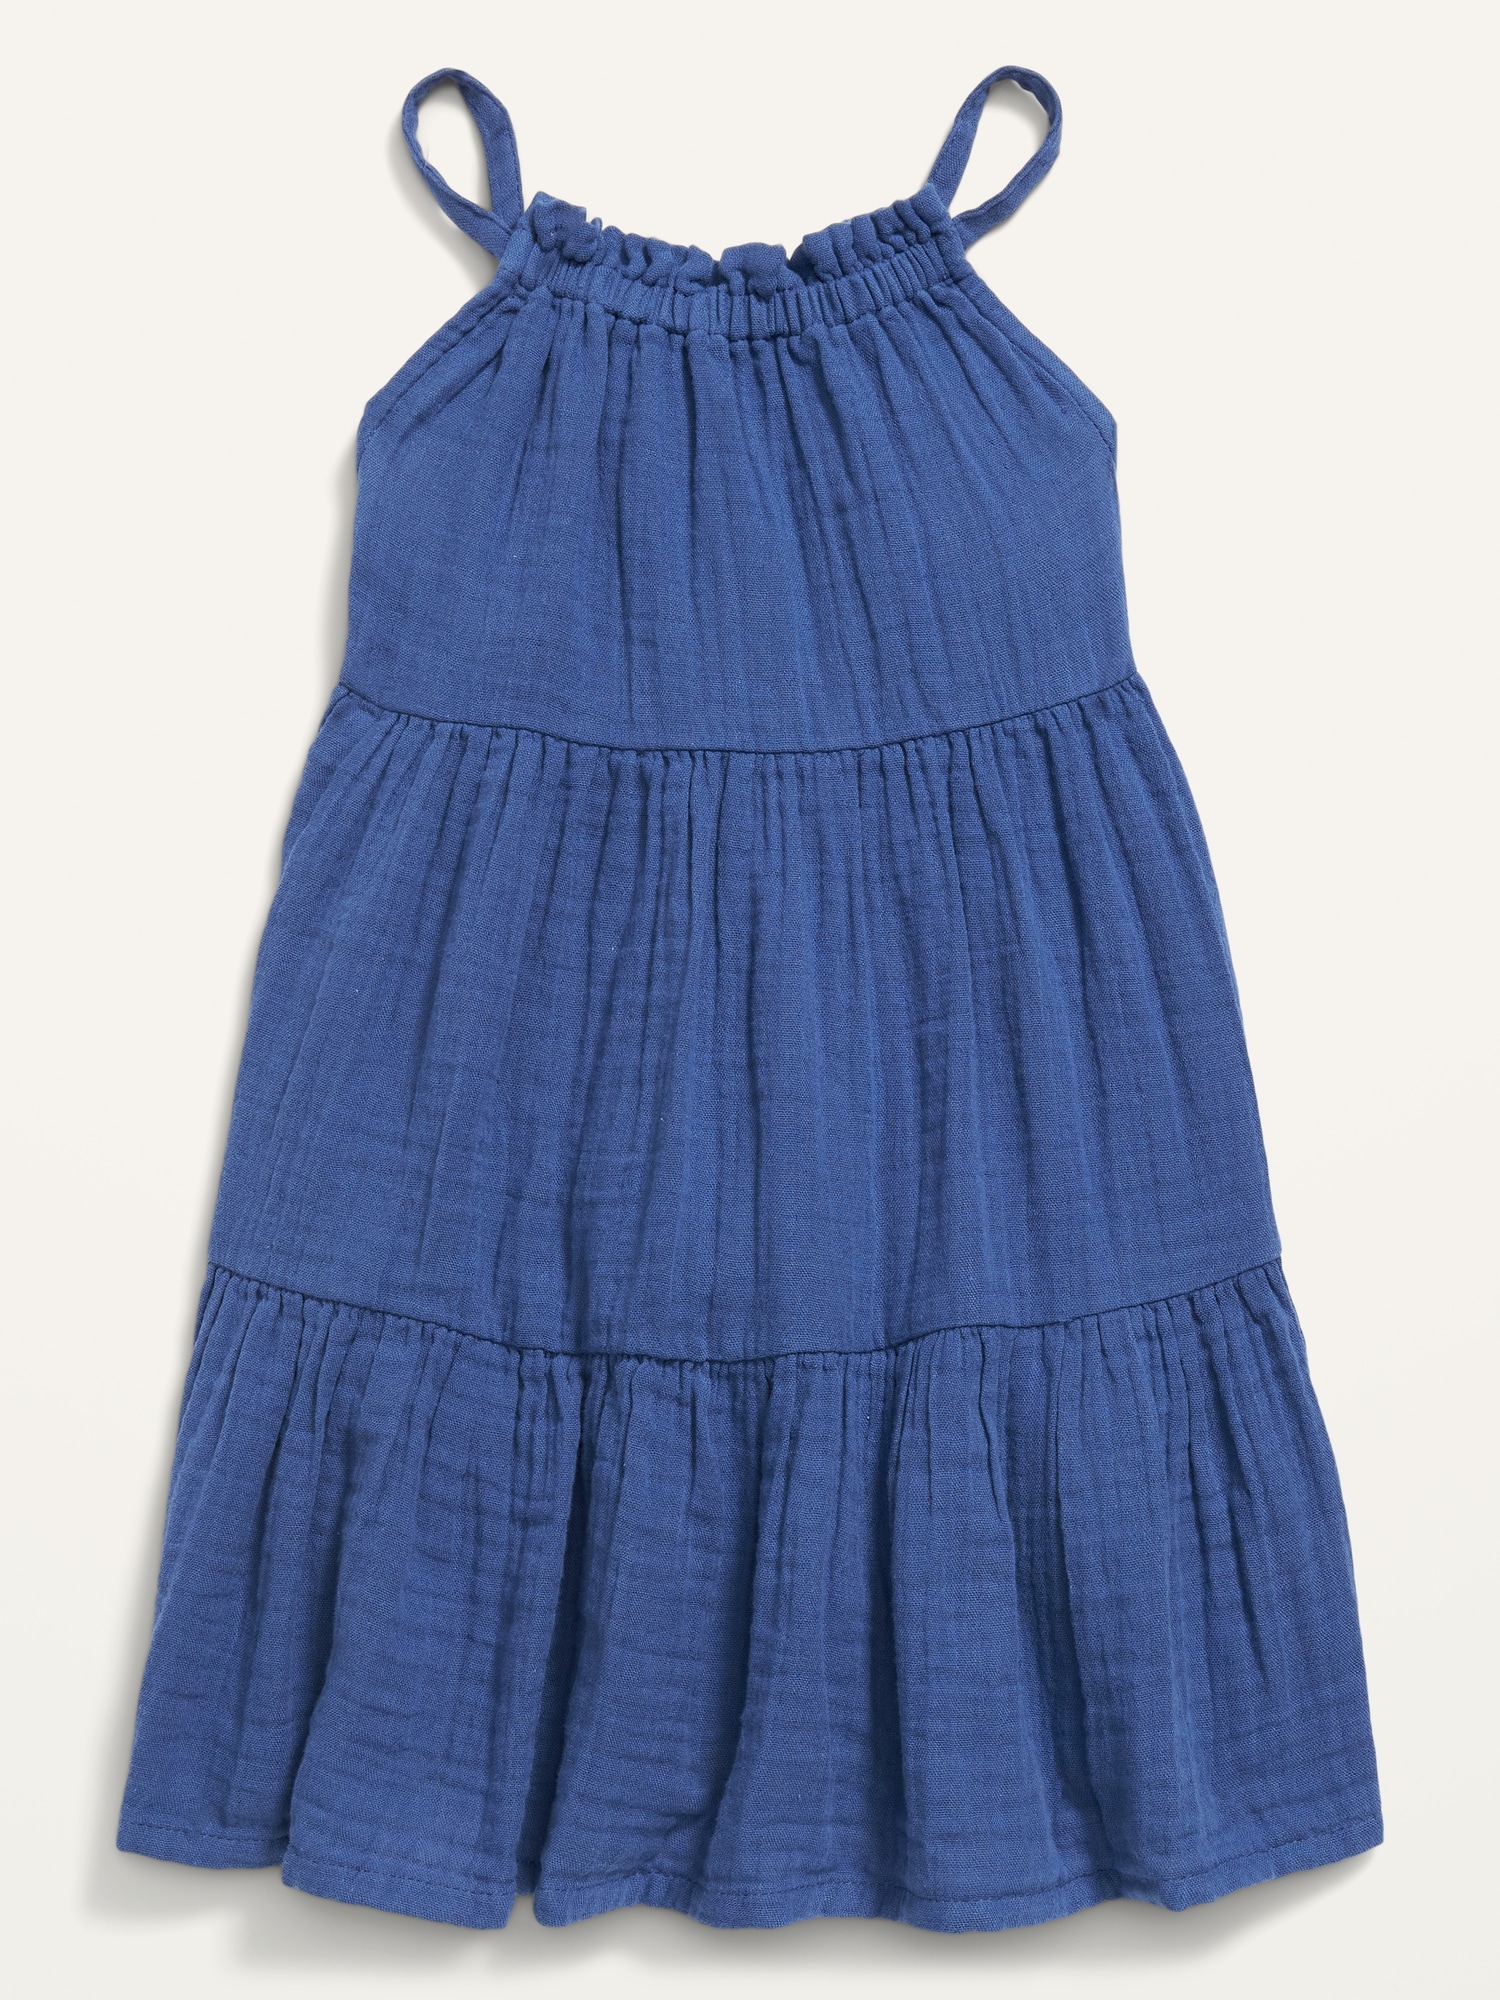 Sleeveless Tiered Swing Dress for Toddler Girls | Old Navy